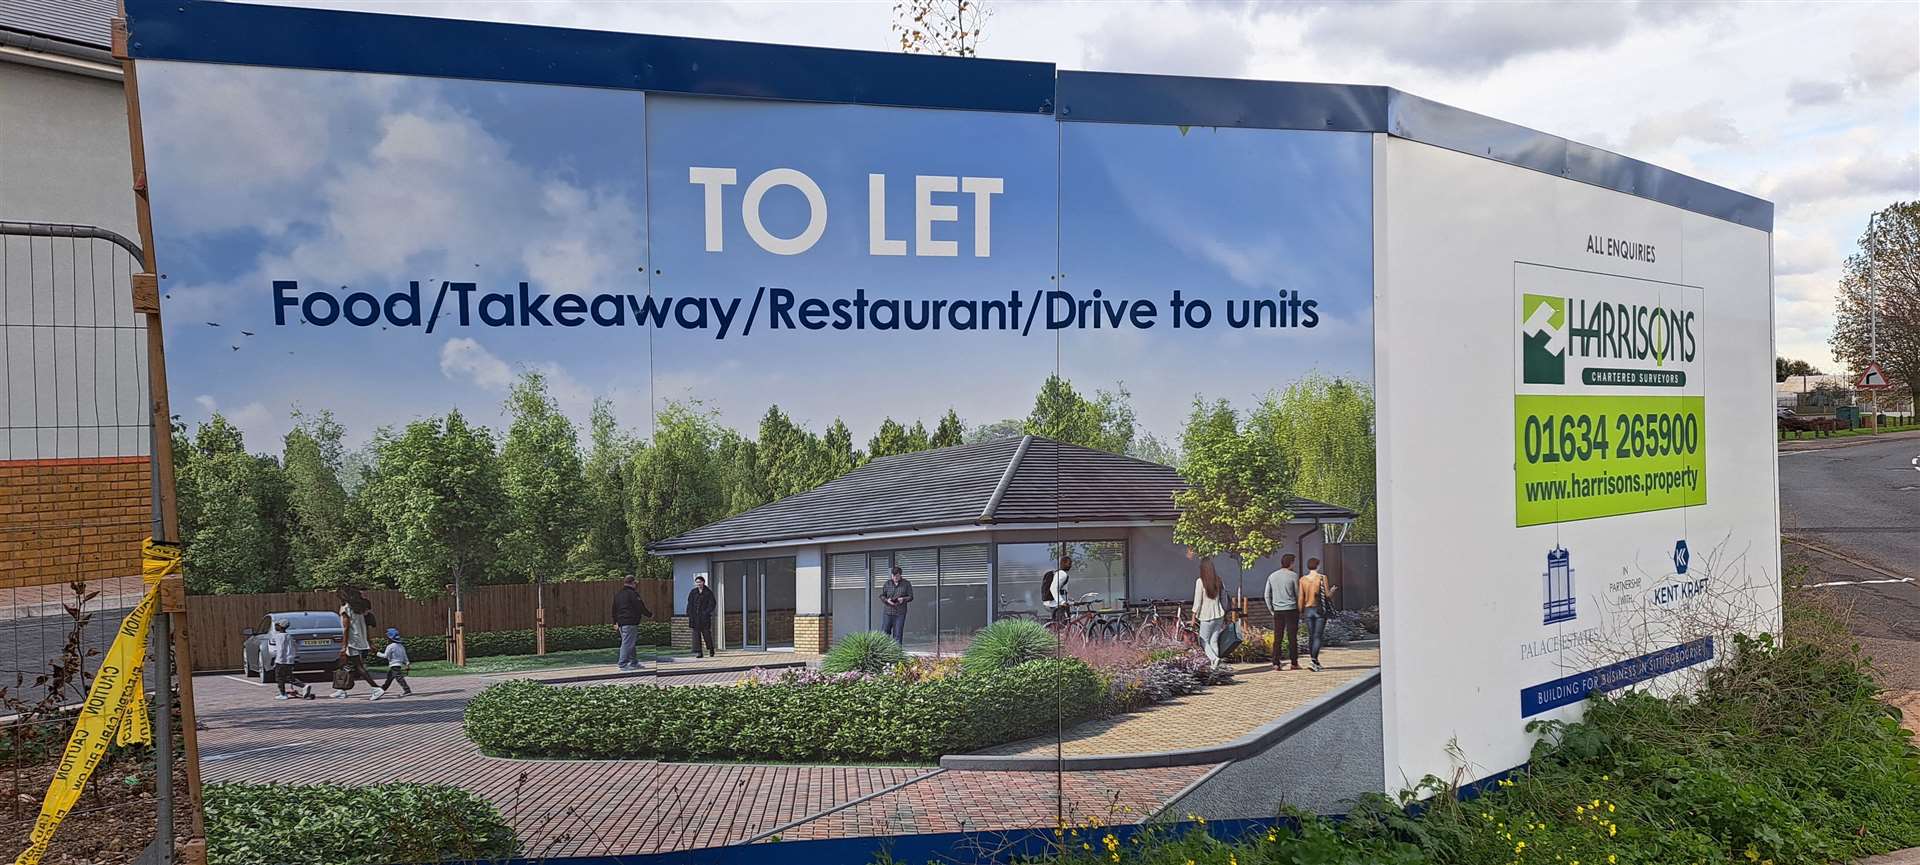 The takeaway units up for let behind the new Greggs' drive-thru. Picture: Megan Carr